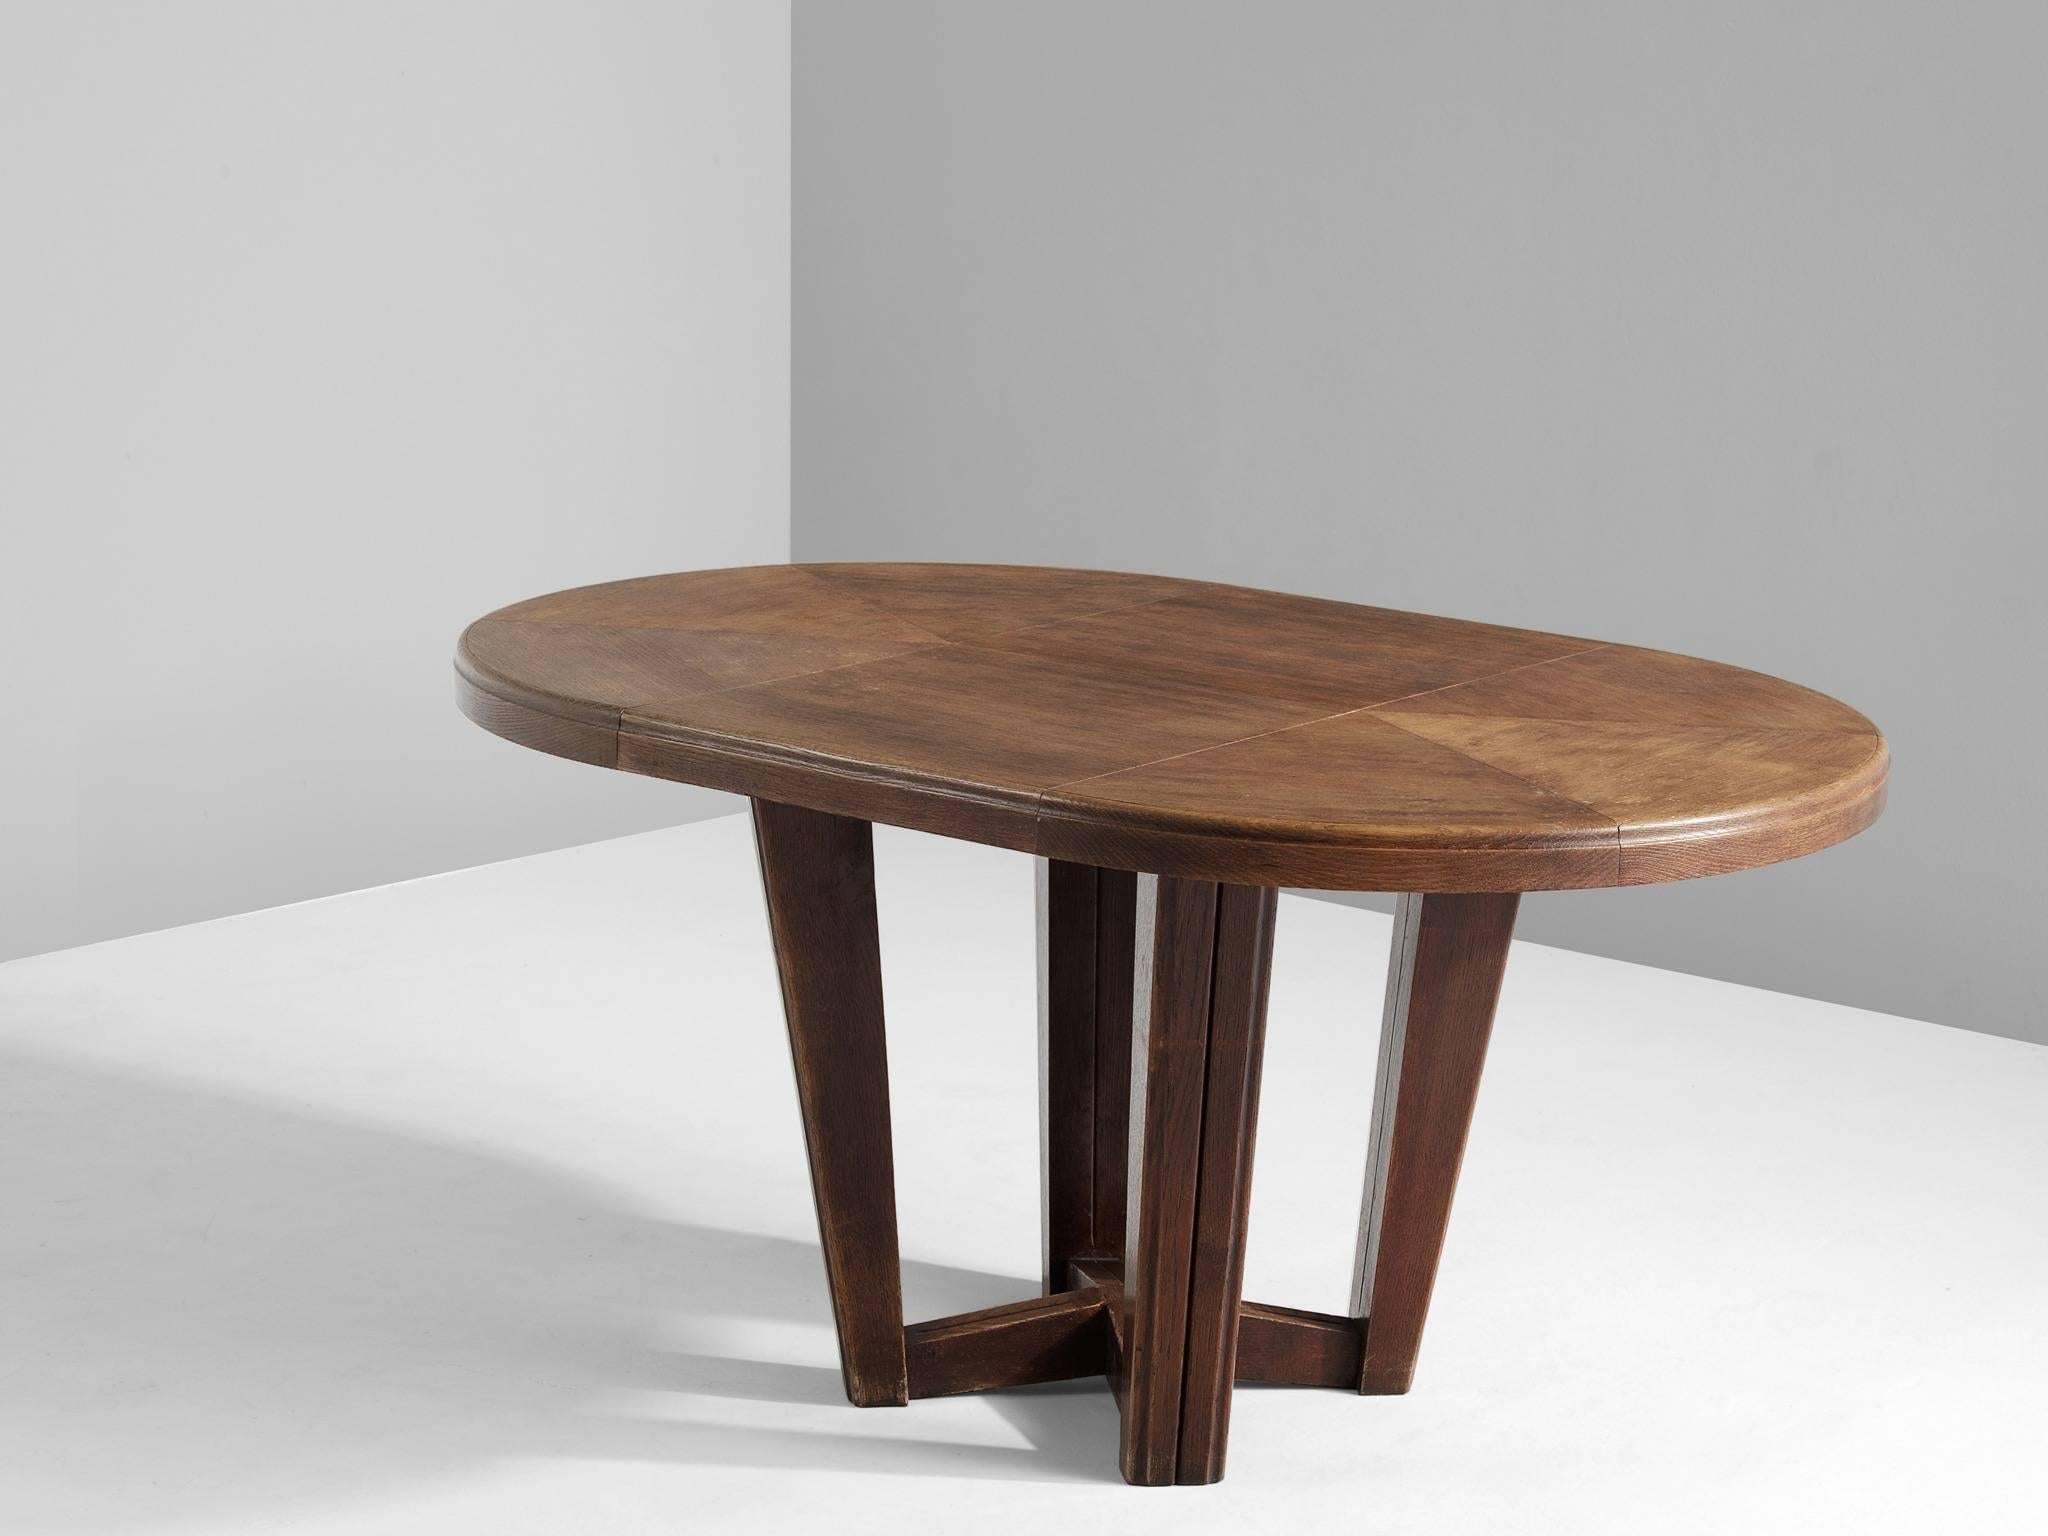 Dining table, in oak, France, 1930s. 

Small oval dining table with inlaid top. This elegant art-deco table has an interesting base. The four tapered legs are combined with a cross-connection. The oval top shows some interesting graphic forms. The